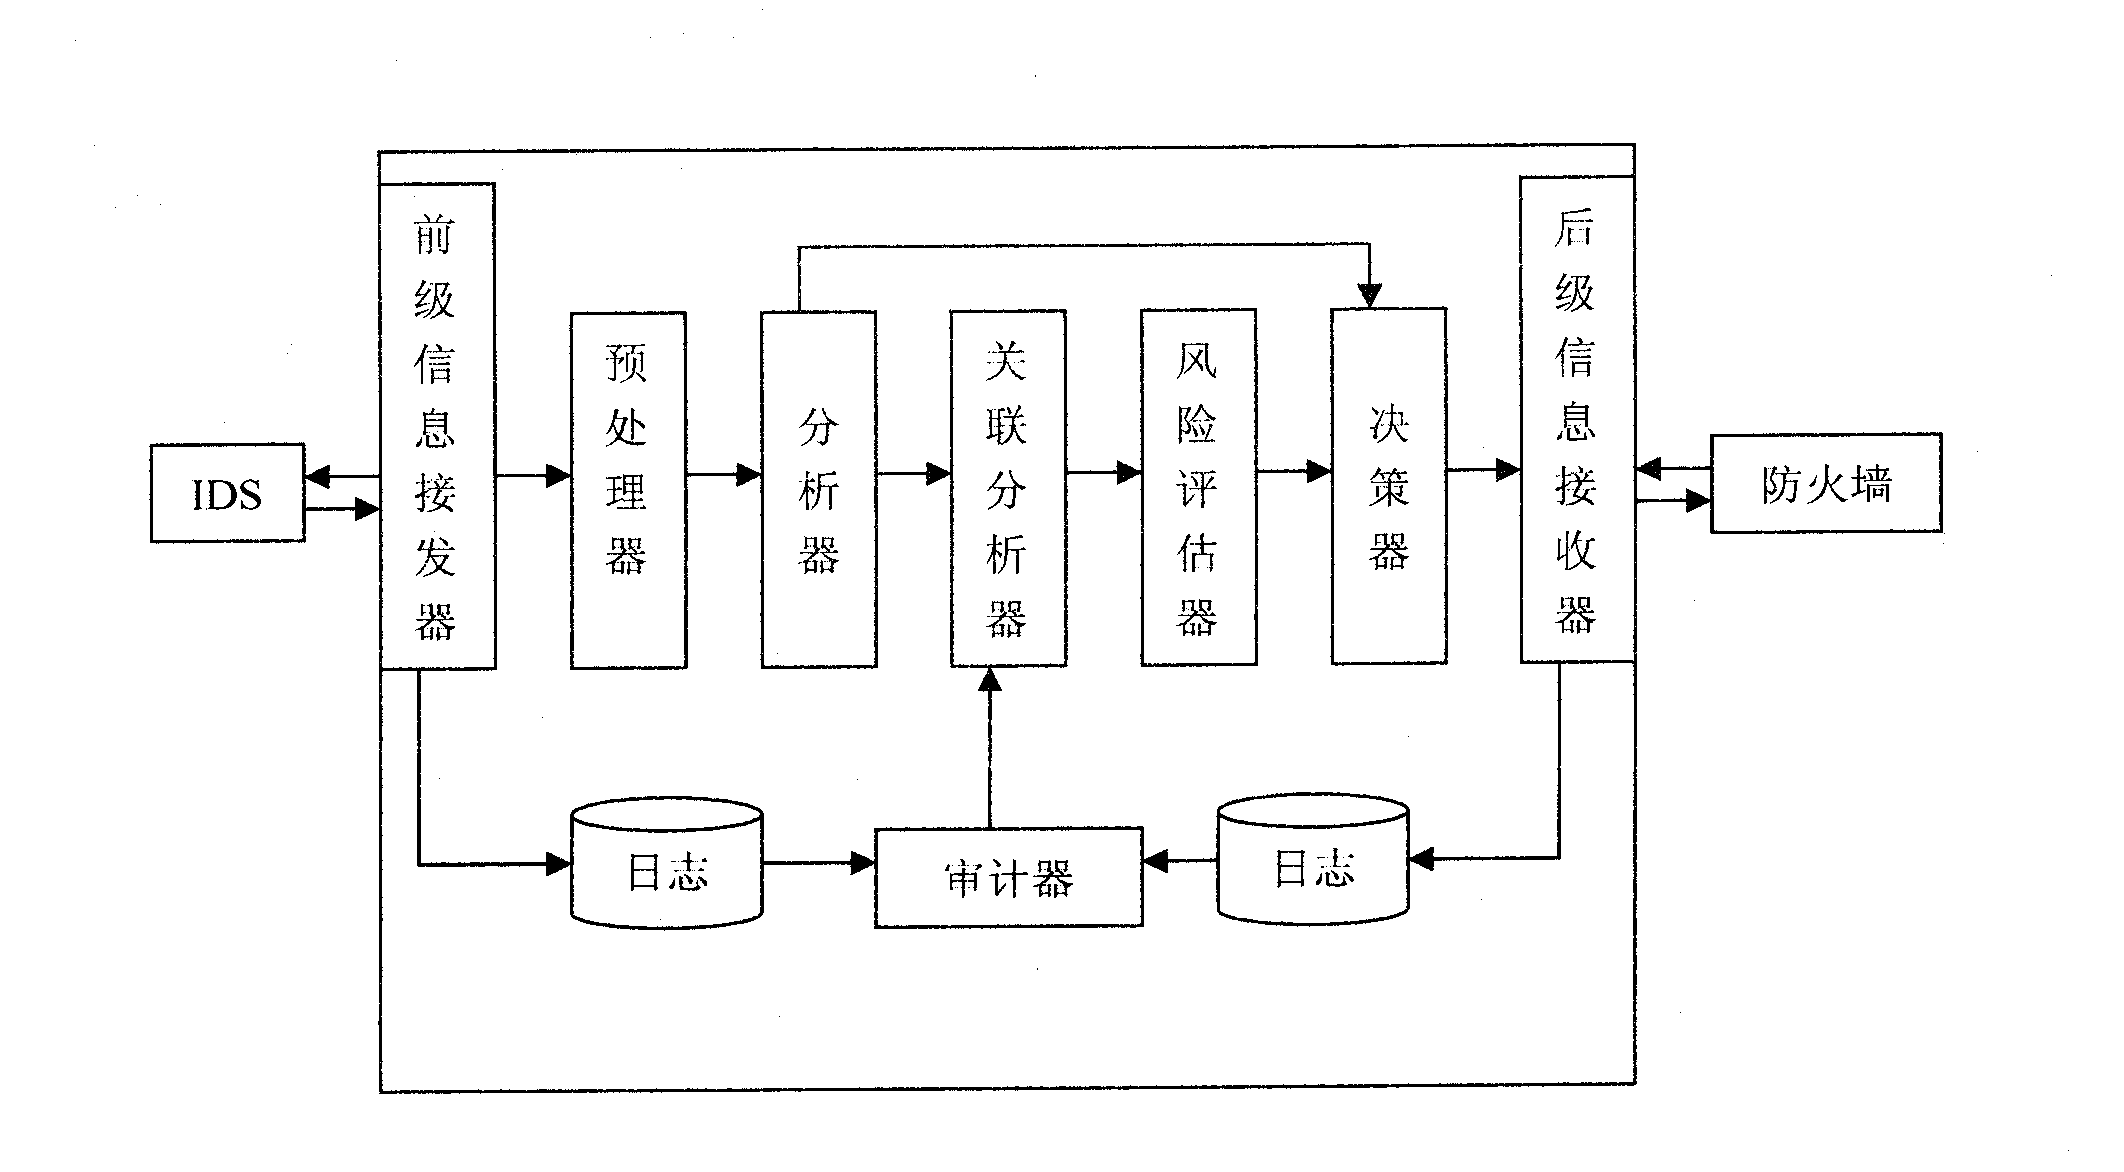 Linkage method for firewall and intrusion-detection system